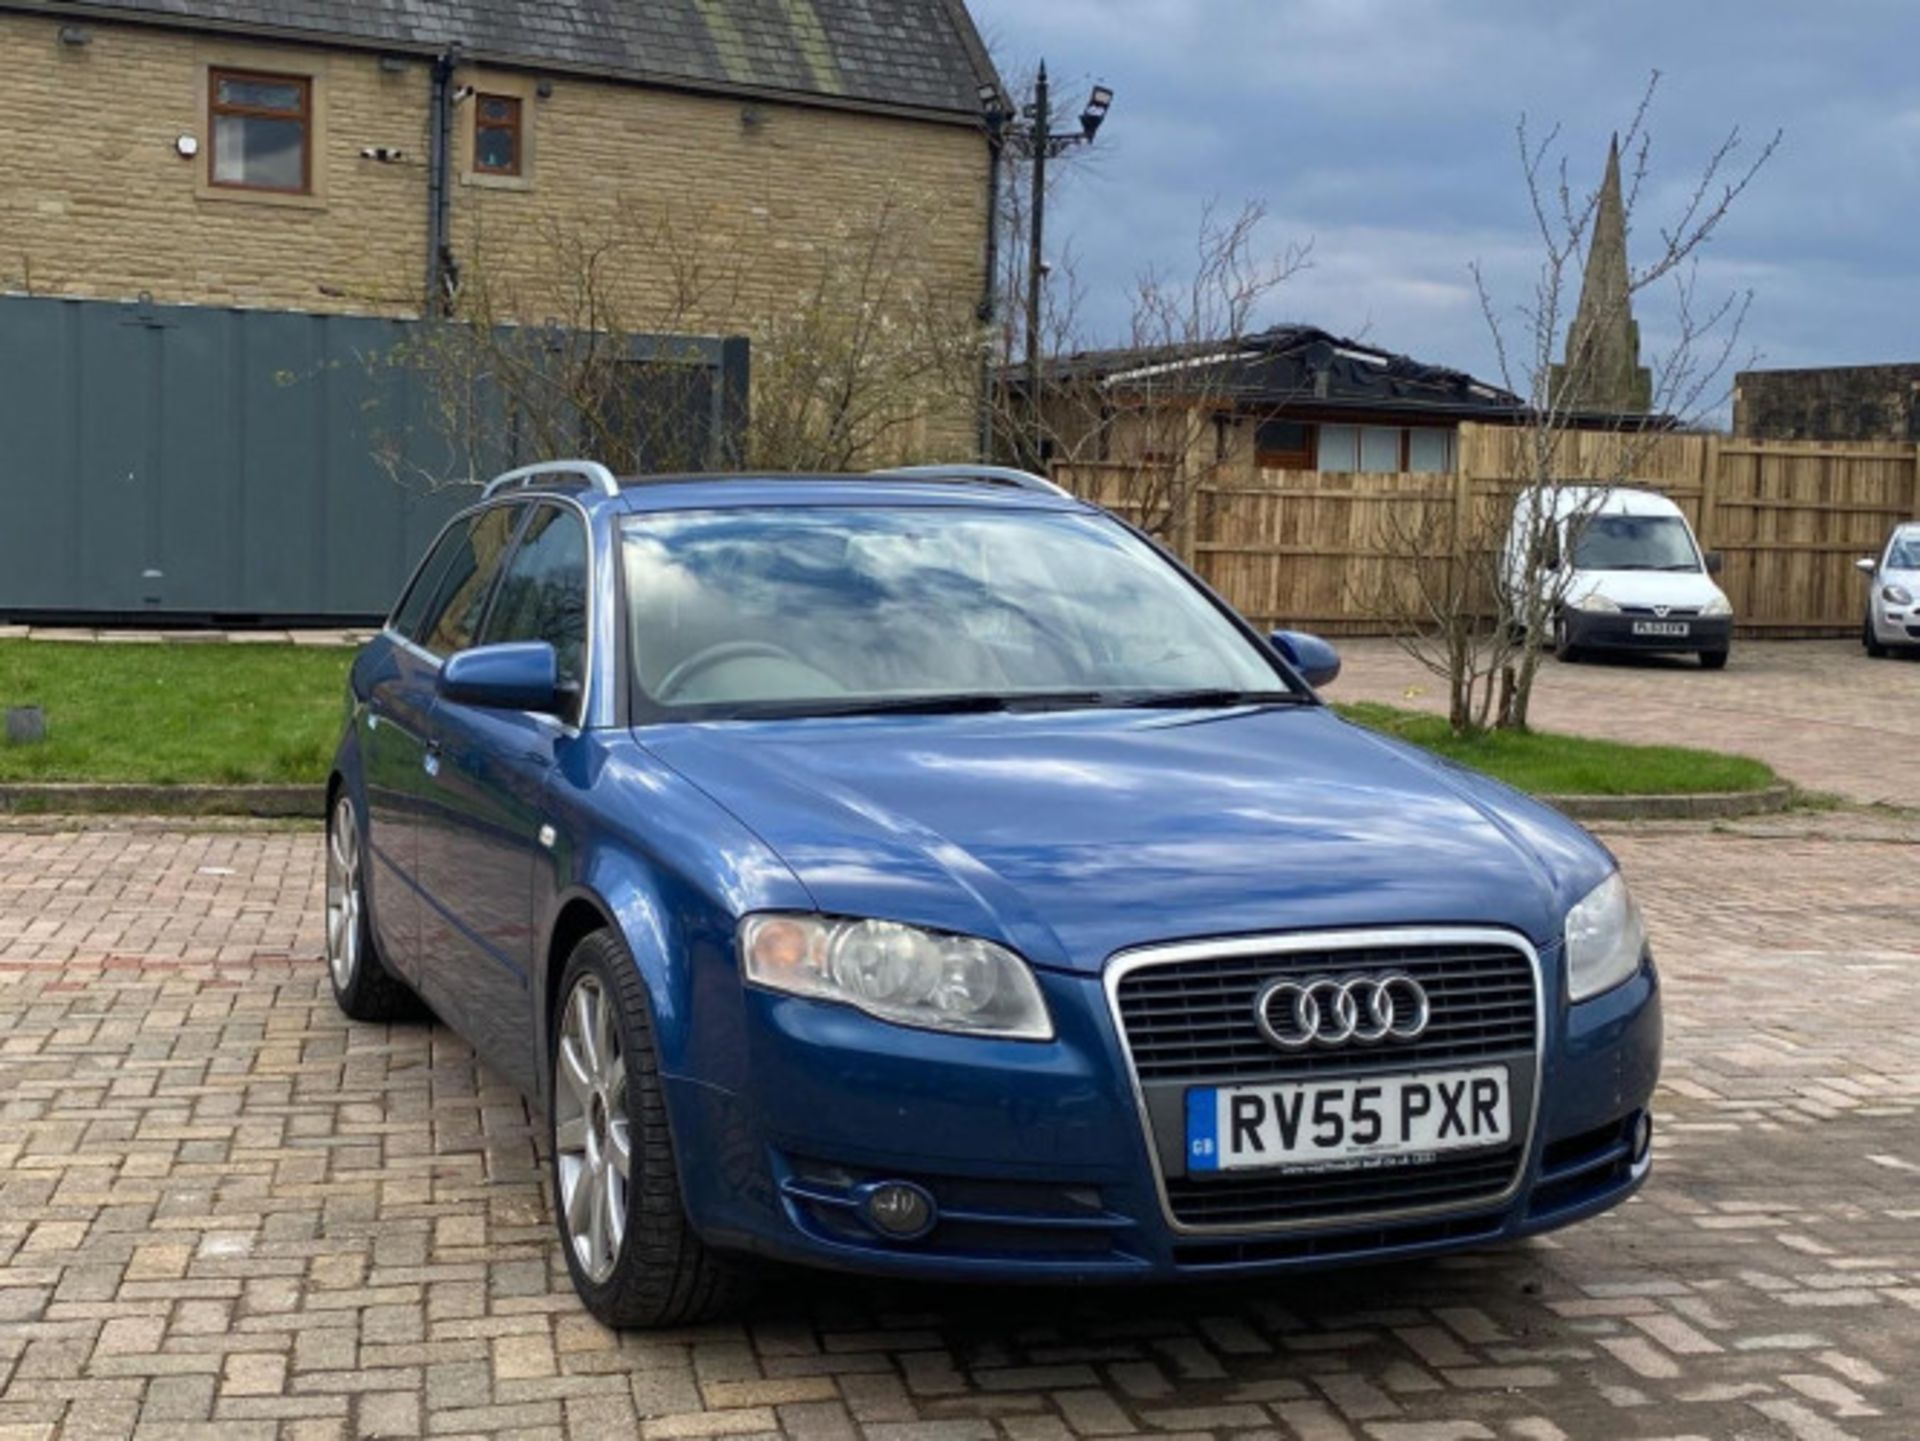 AUDI A4 AVANT 1.9 TDI SE 5DR ESTATE - RARE AND RELIABLE LUXURY WAGON >>--NO VAT ON HAMMER--<< - Image 94 of 97